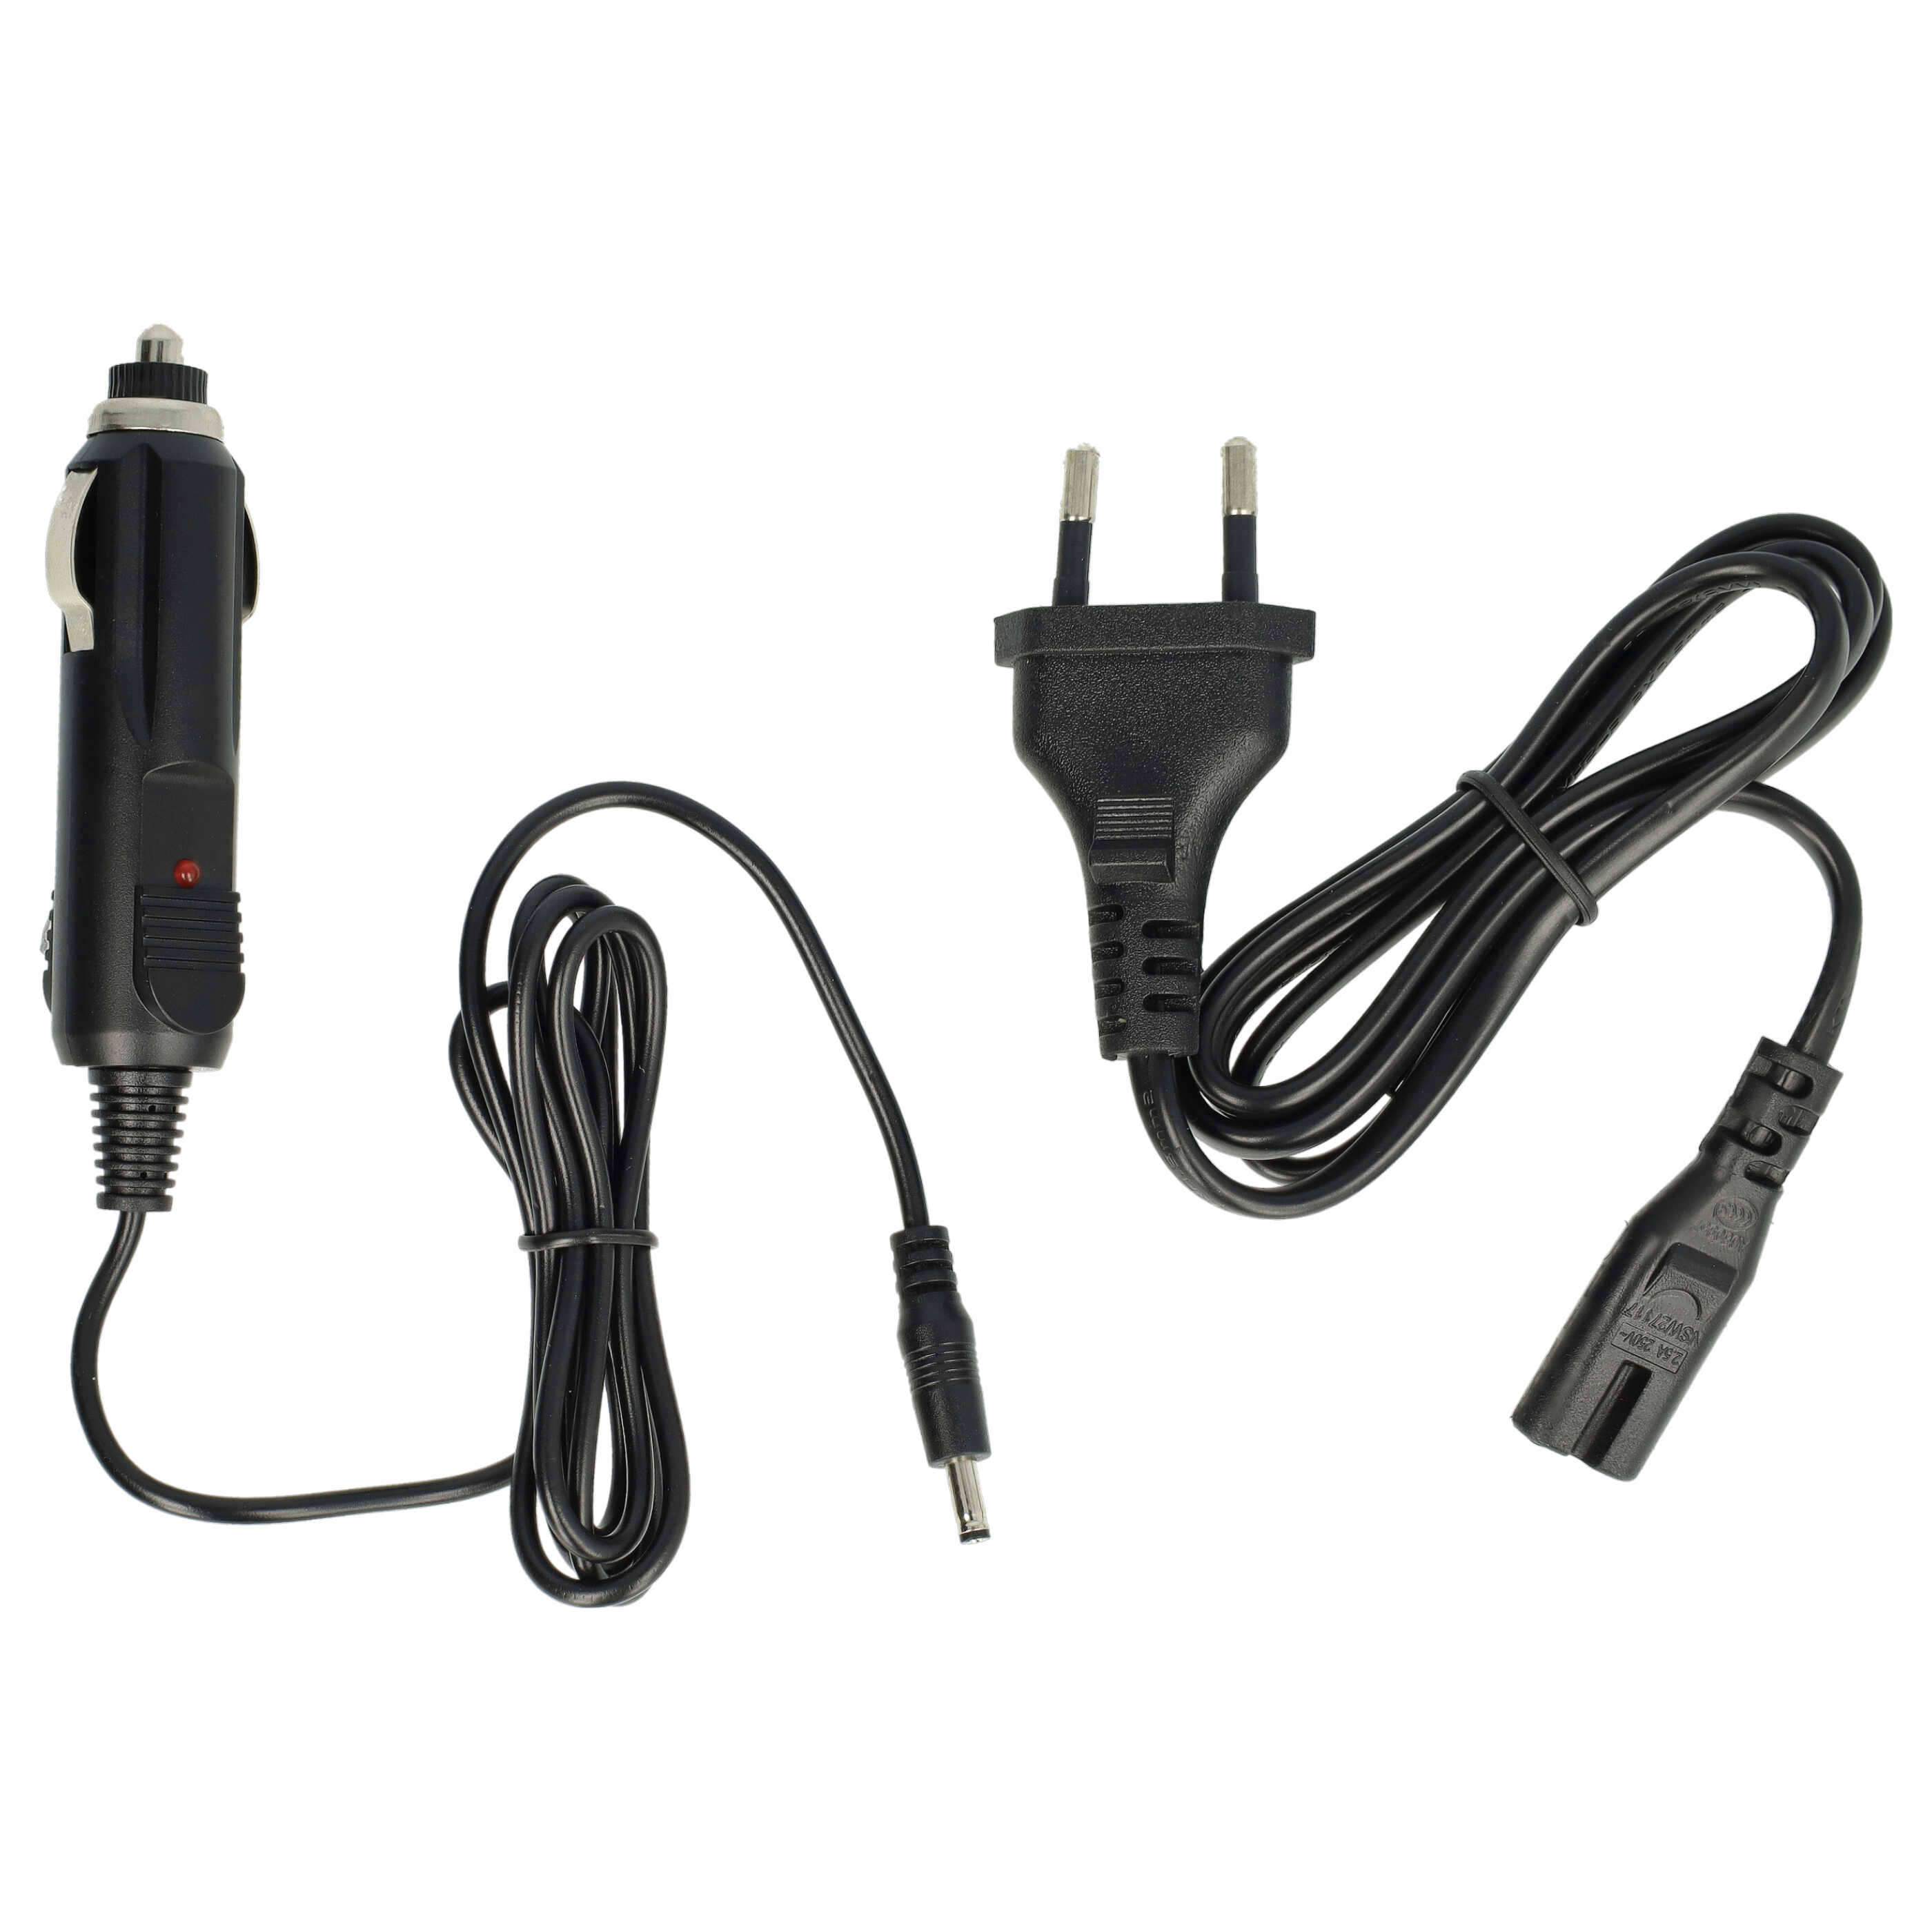 Battery Charger suitable for Optio X90 Camera etc. - 0.6 A, 4.2 V